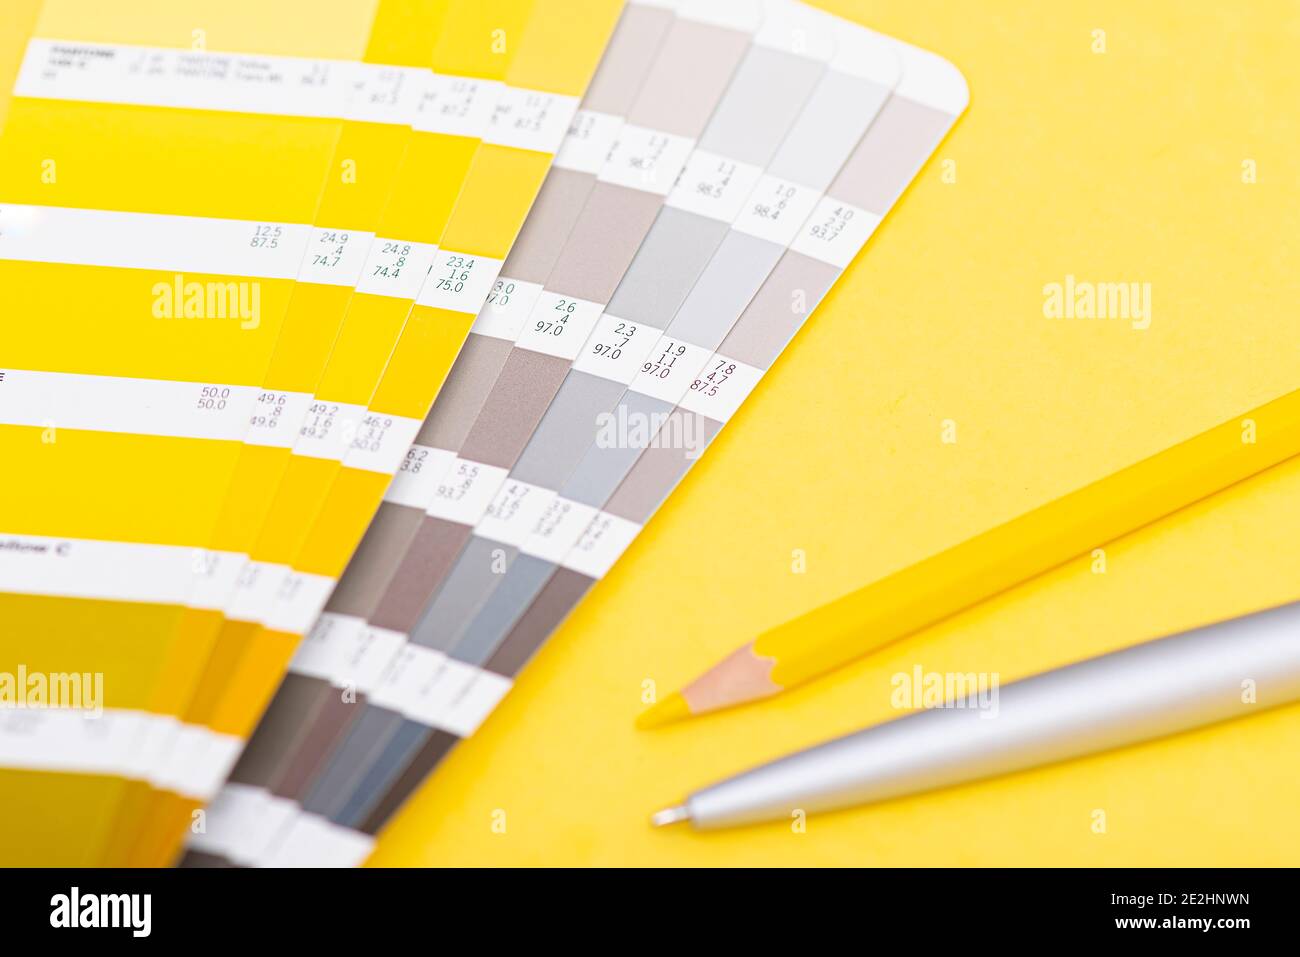 Palette with color of the year 2021 - vibrant yellow and neutral gray, lay out, color template Stock Photo